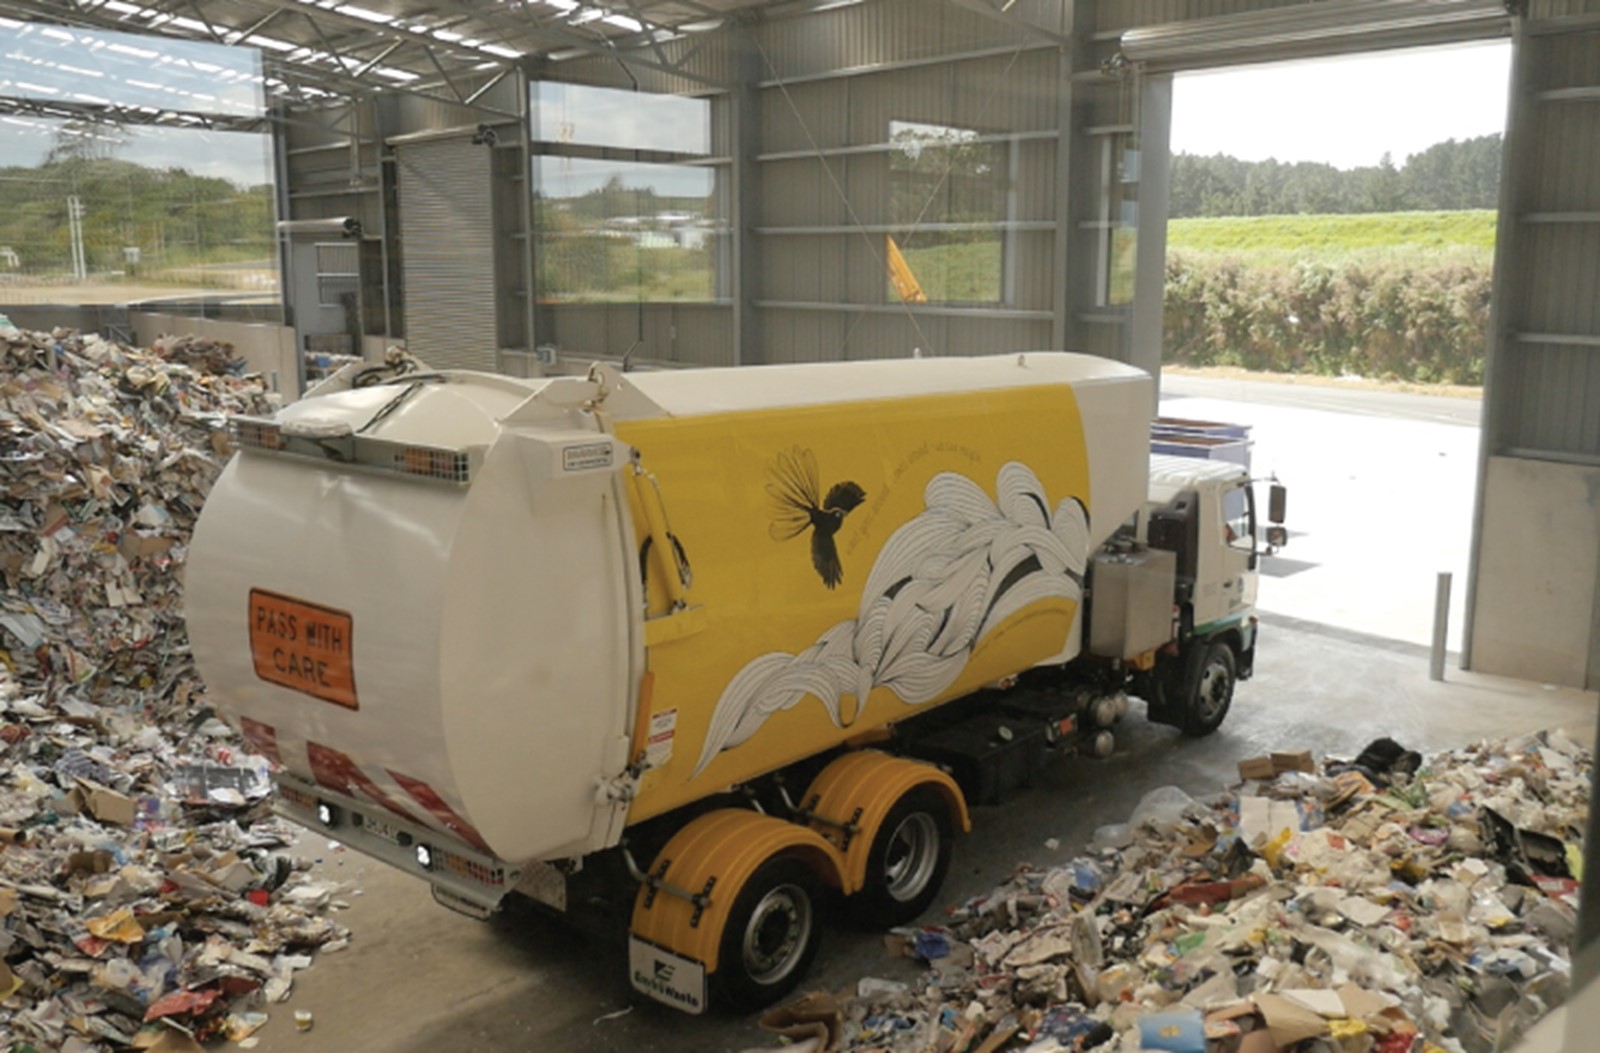 The recycling plant